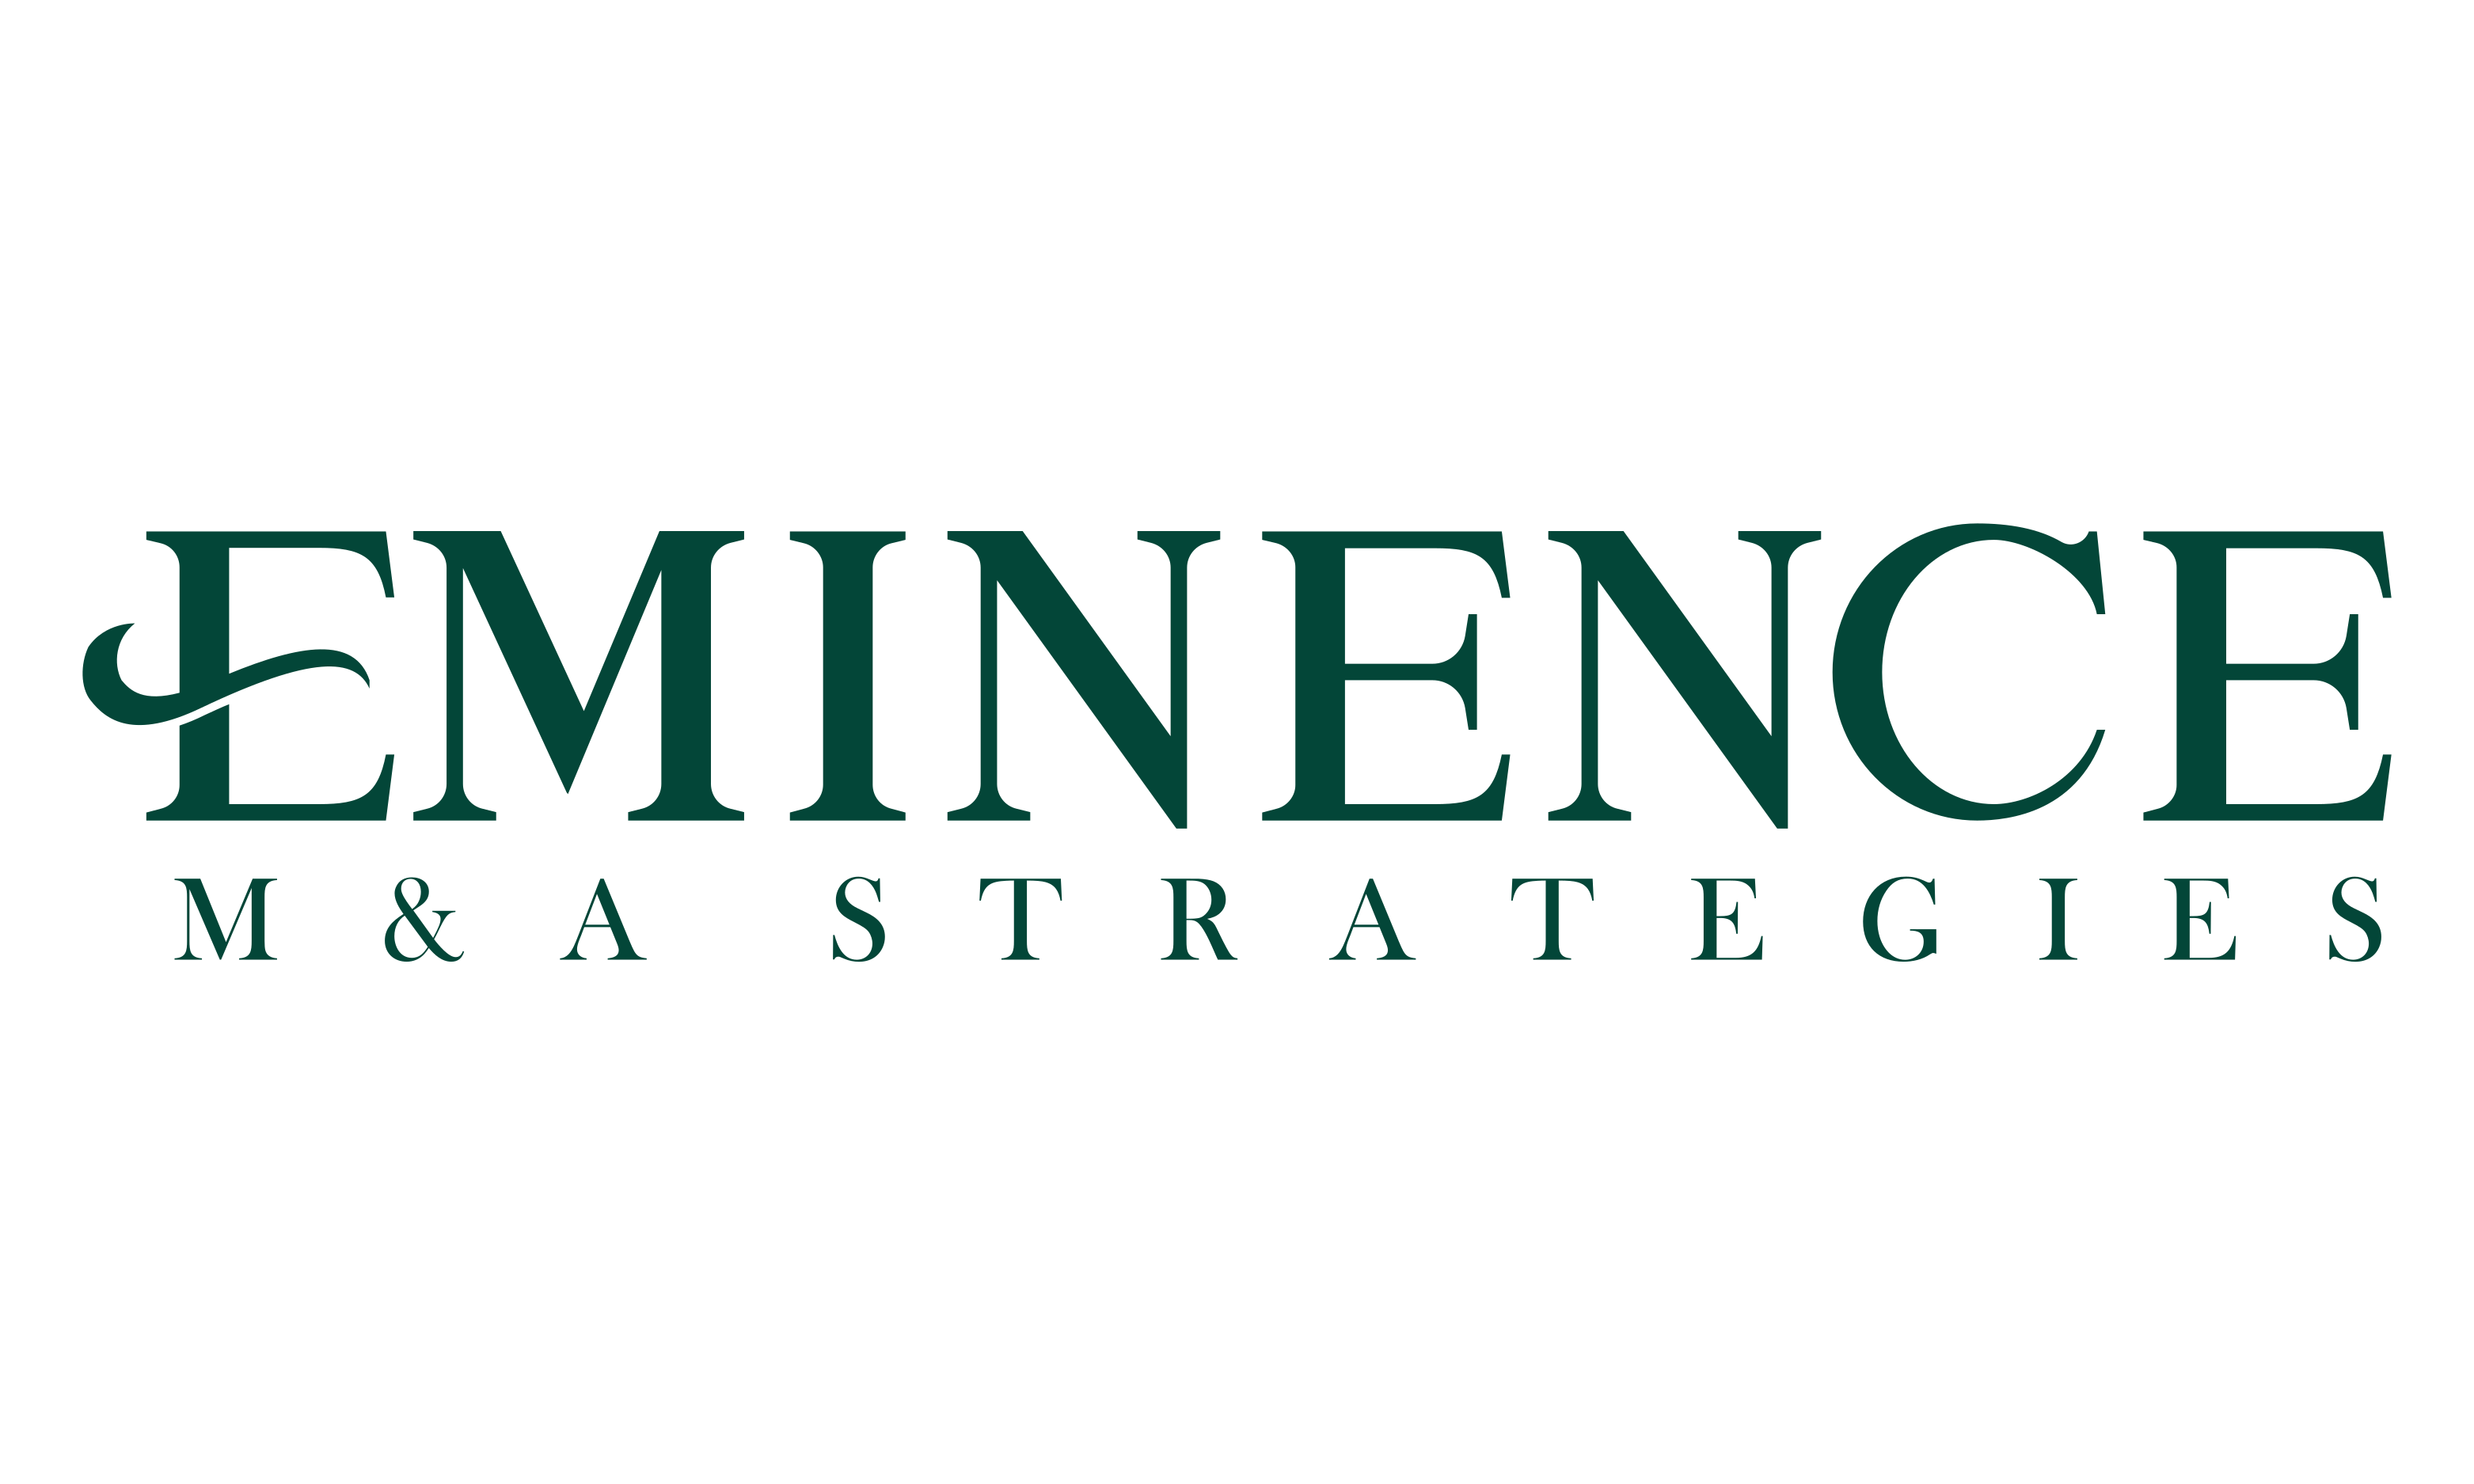 Eminence M&A Strategies Logo for Vine Collective Branding